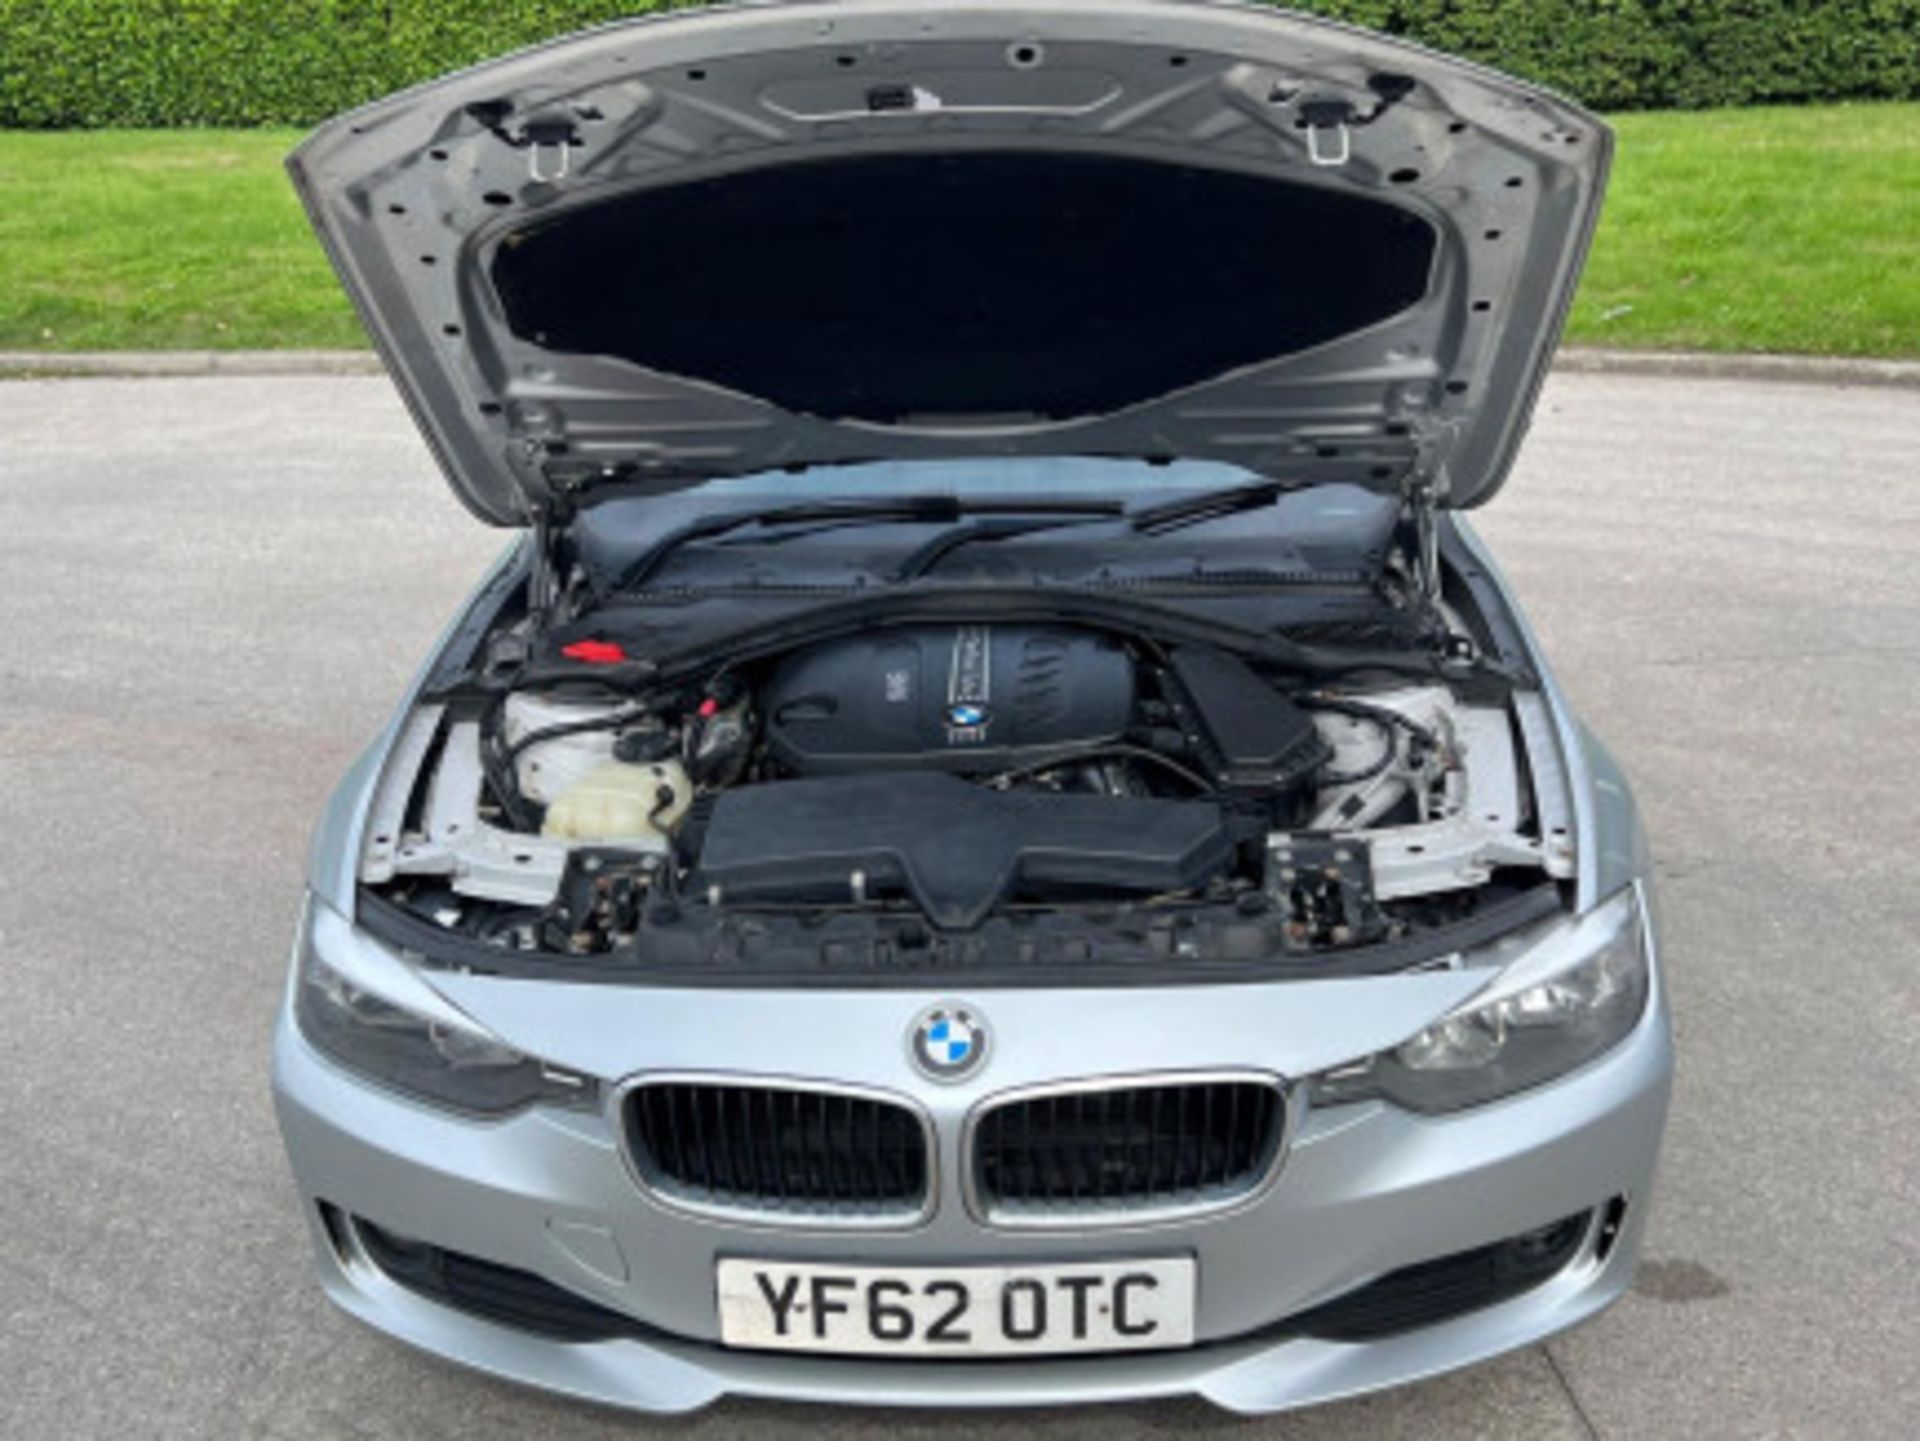 BMW 3 SERIES 2.0 DIESEL ED START STOP - A WELL-MAINTAINED GEM >>--NO VAT ON HAMMER--<< - Image 139 of 229